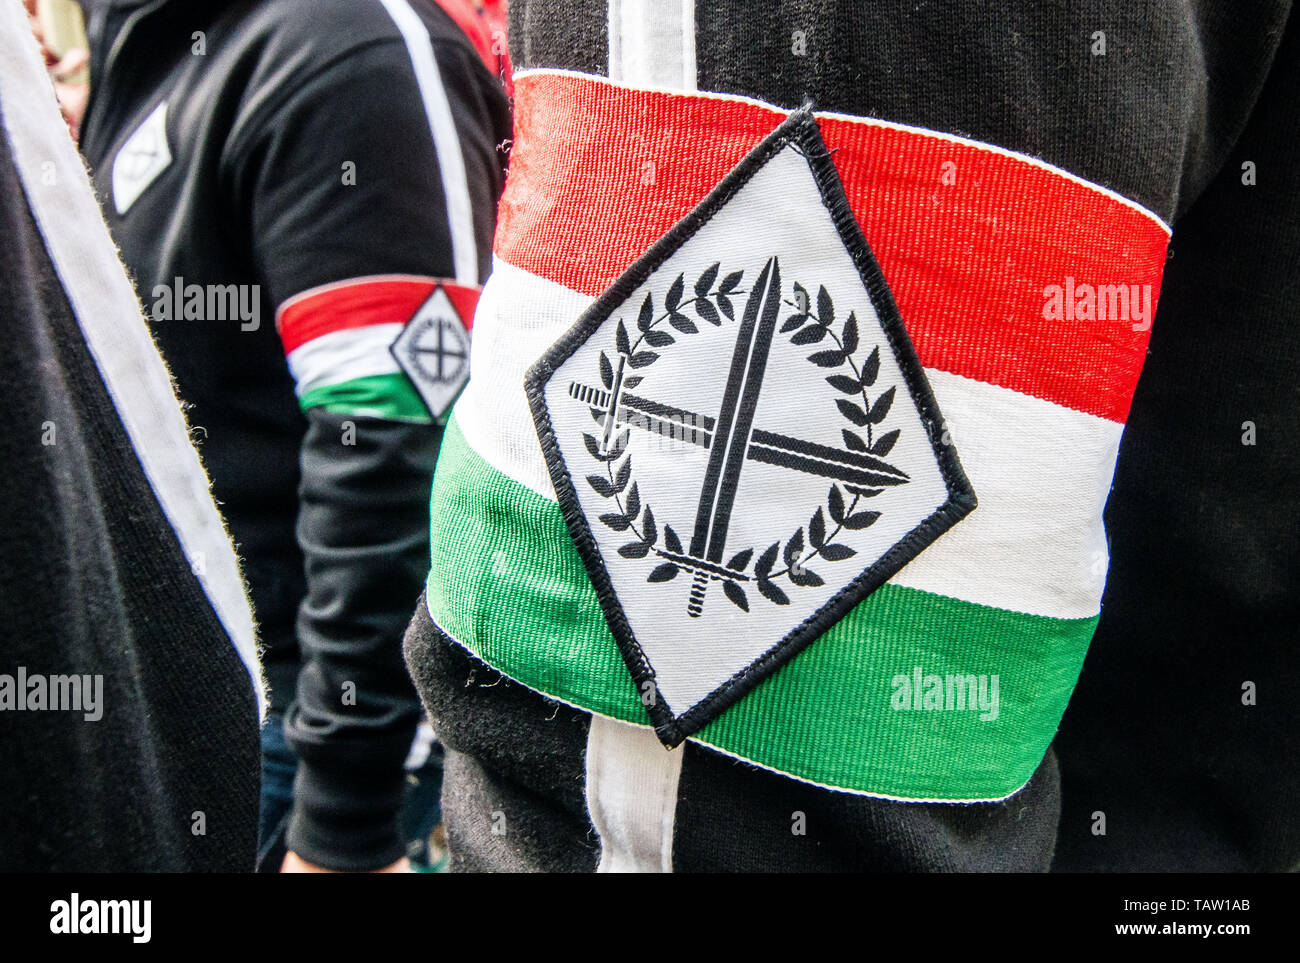 Dortmund, Nordrhein Westfalen, Germany. 25th May, 2019. The symbol of the Legio Hungaria, a Hungarian neonazi group that made an appearance in Dortmund, Germany. Prior to the European Elections, the neonazi party Die Rechte (The Right) organized a rally in the German city of Dortmund to promote their candidate, the incarcerated Holocaust denier Ursula Haverbeck. The demonstration and march were organized by prominent local political figure and neonazi activist Michael Brueck (Michael BrÃ¼ck) who enlisted the help of not only German neonazis, but also assistance from Russian, Bulgarian, Hungar Stock Photo